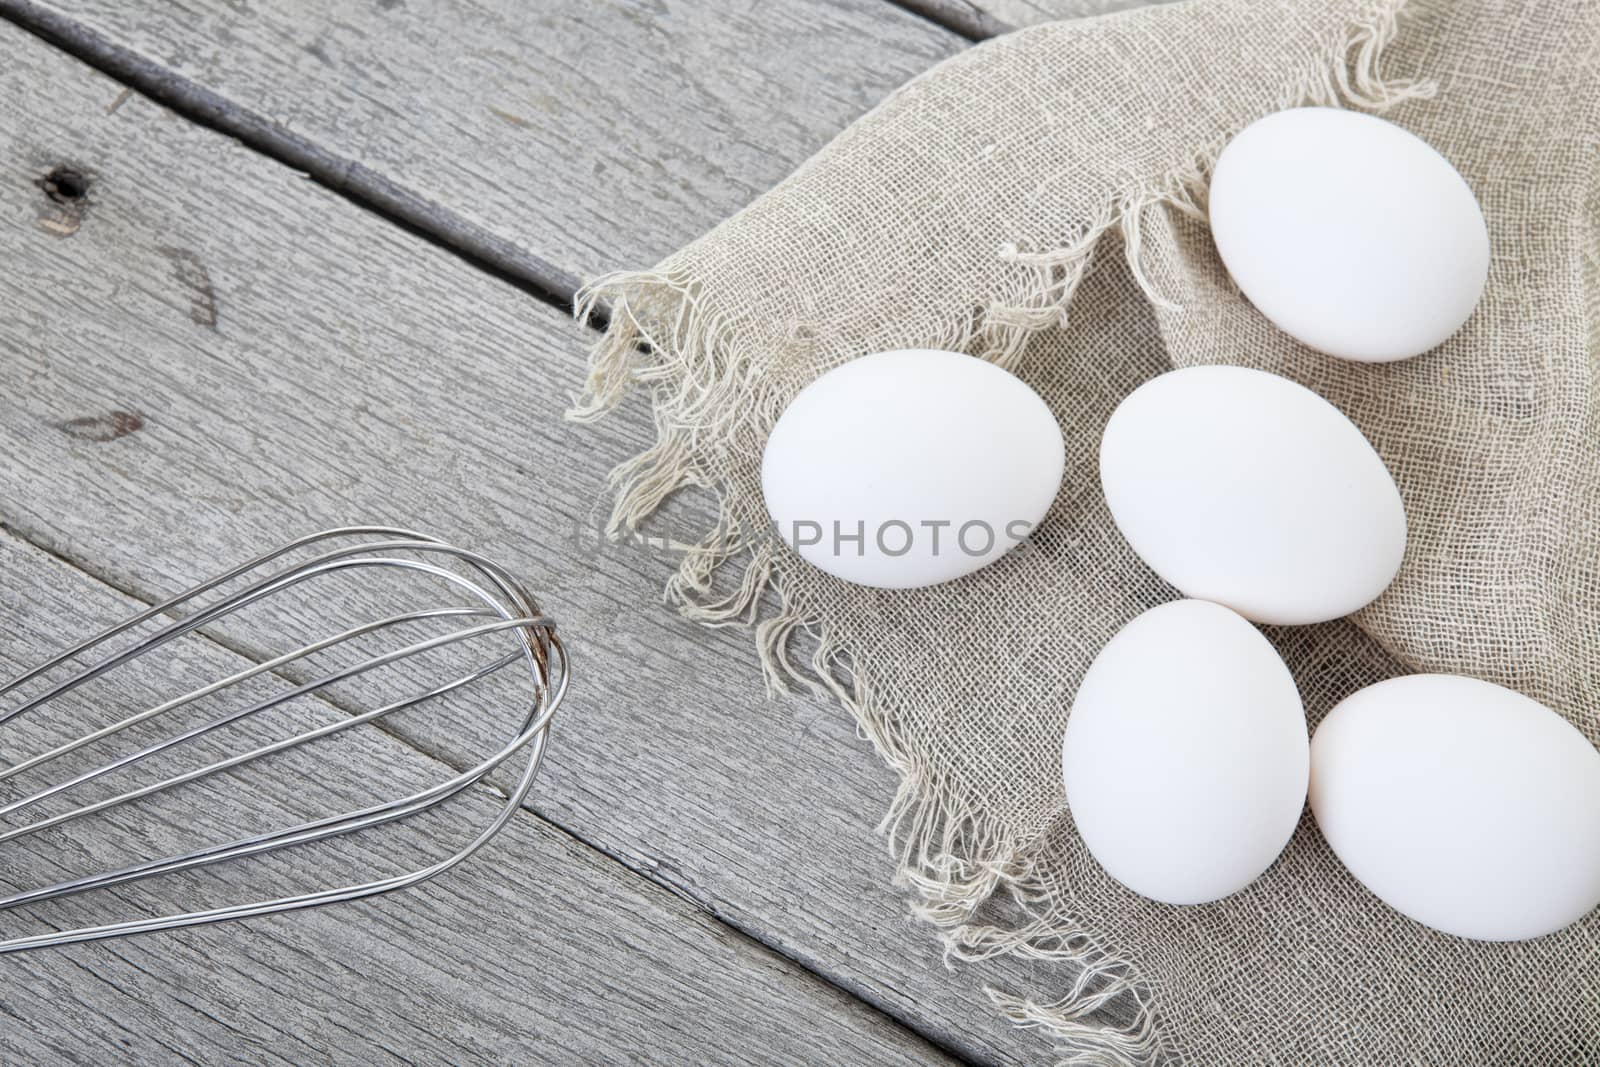 Rustic Egg Styling by songbird839